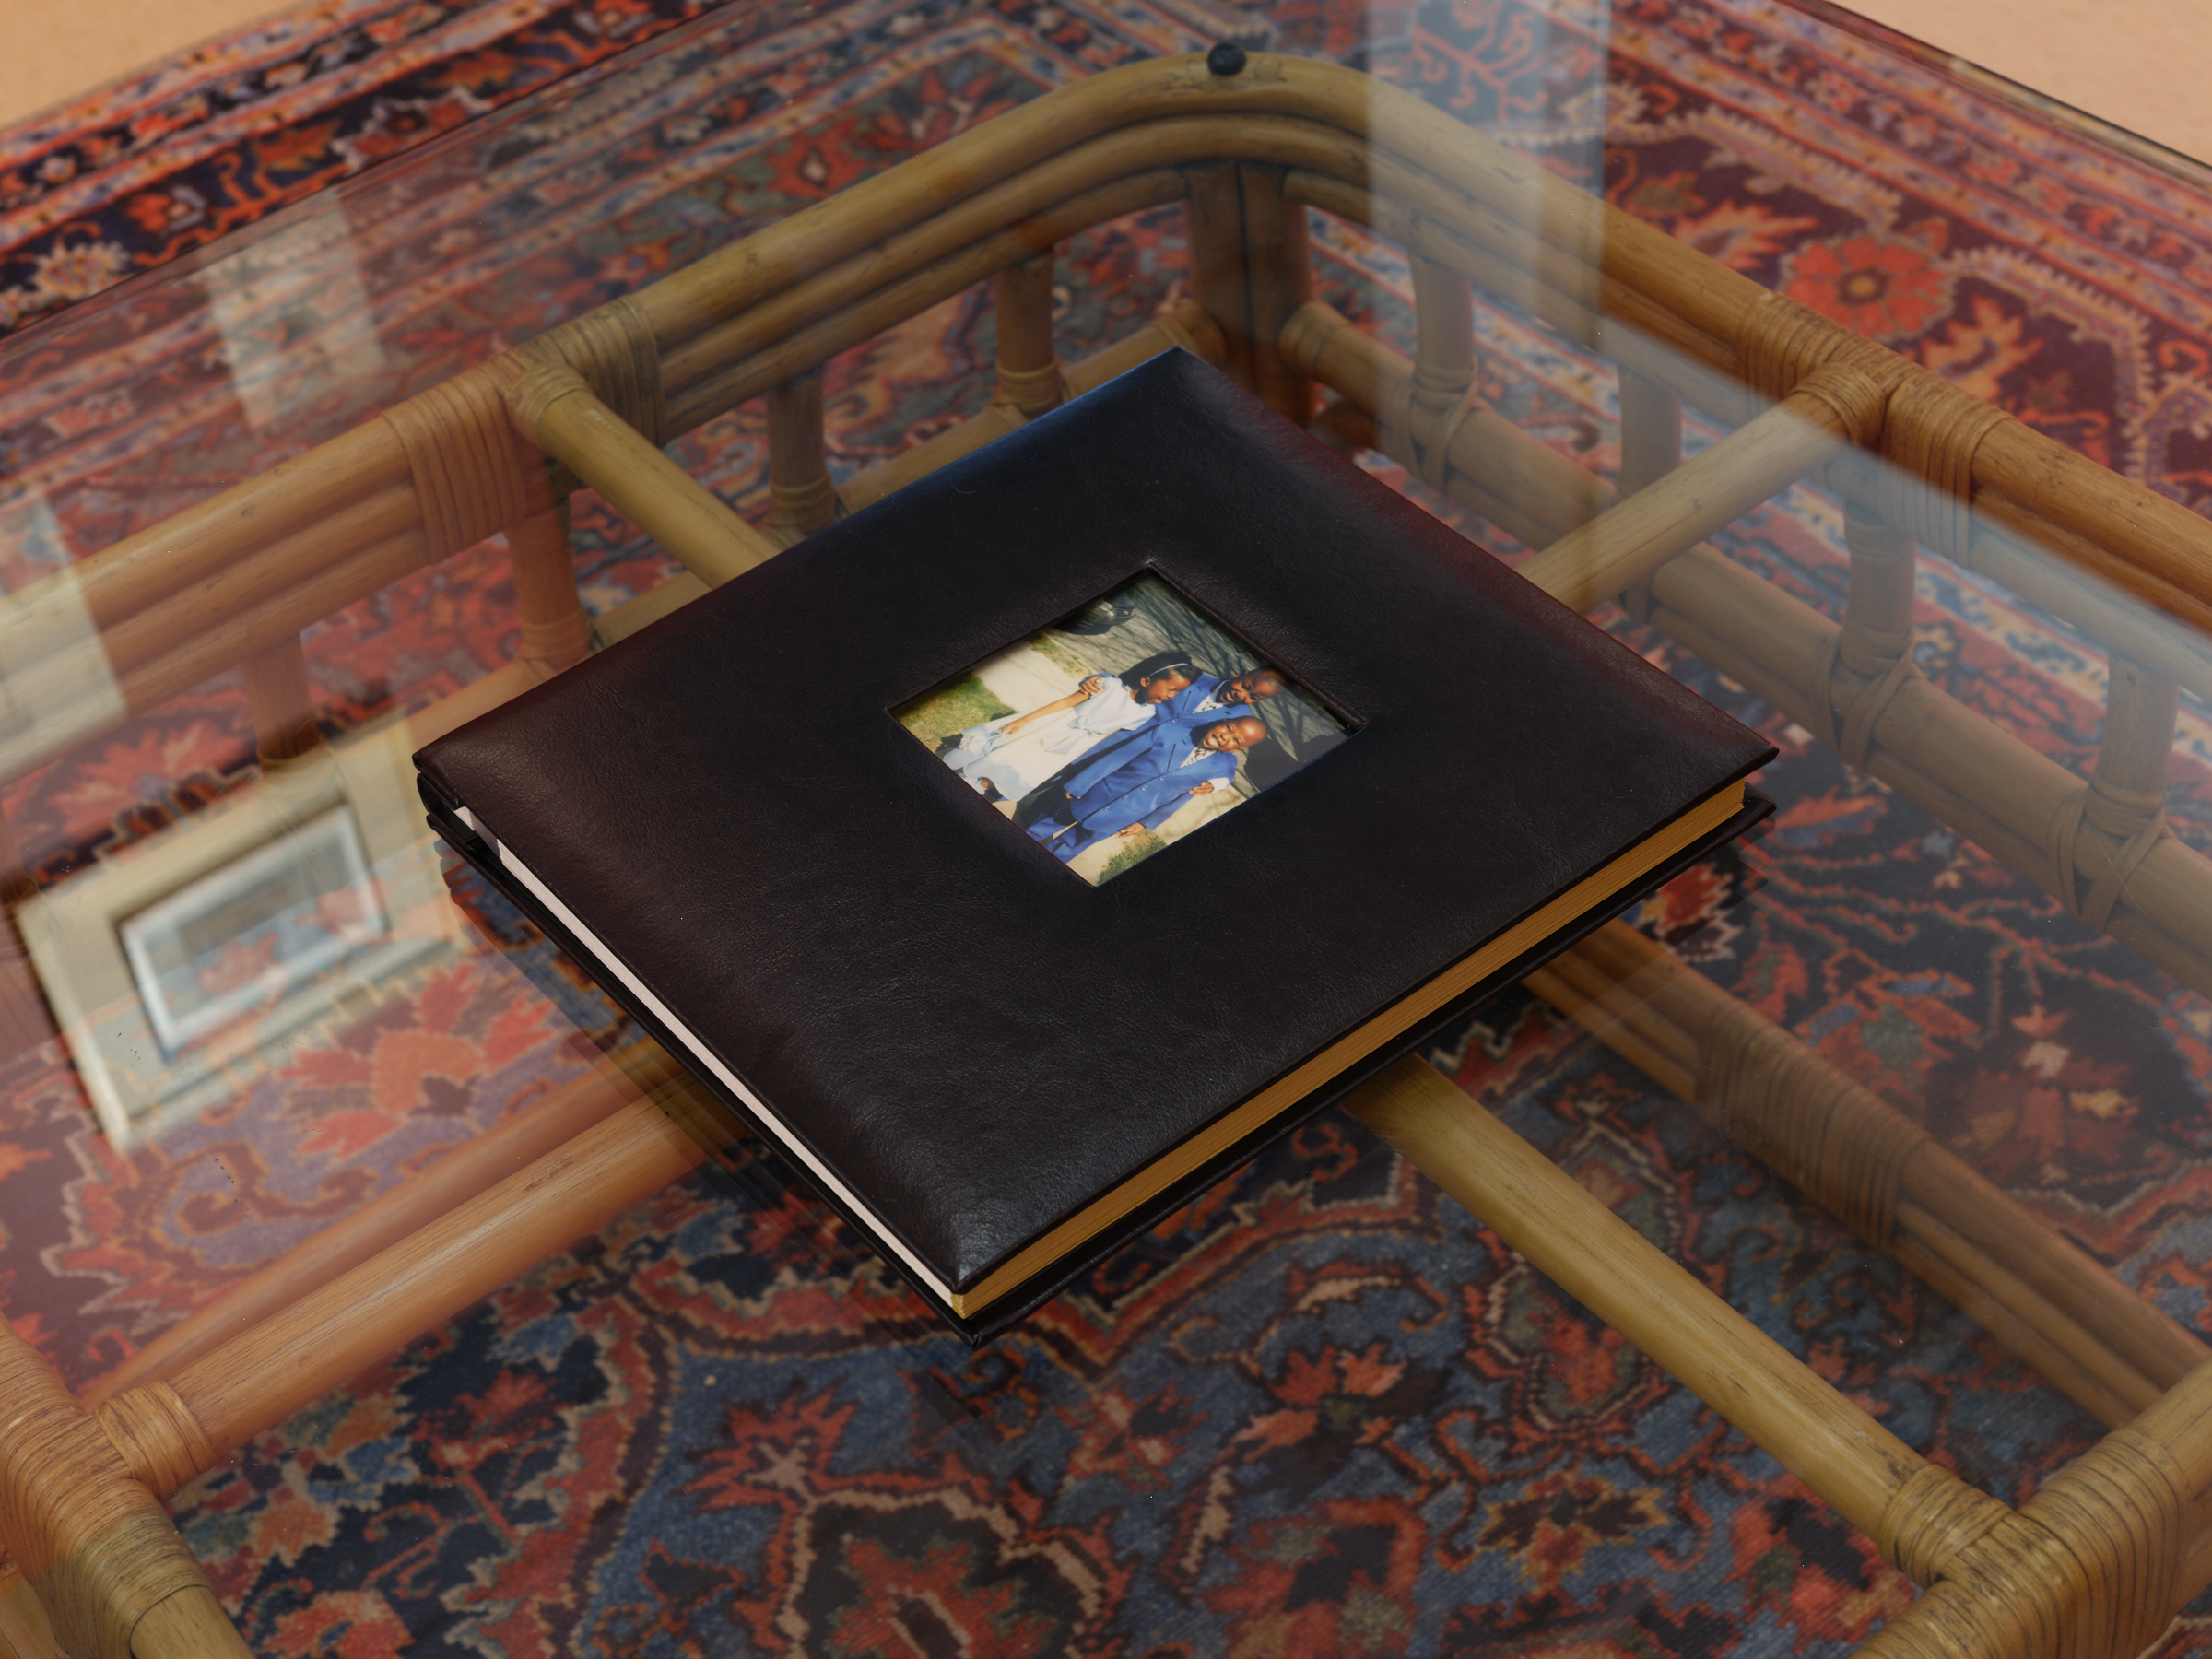 A black leather bound photo album with a picture of three young Black children dressed for church rests on a glass top coffee table. The patterned red, blue and black carpet below is visible and some reflections of framed artwork from the show can also be seen.